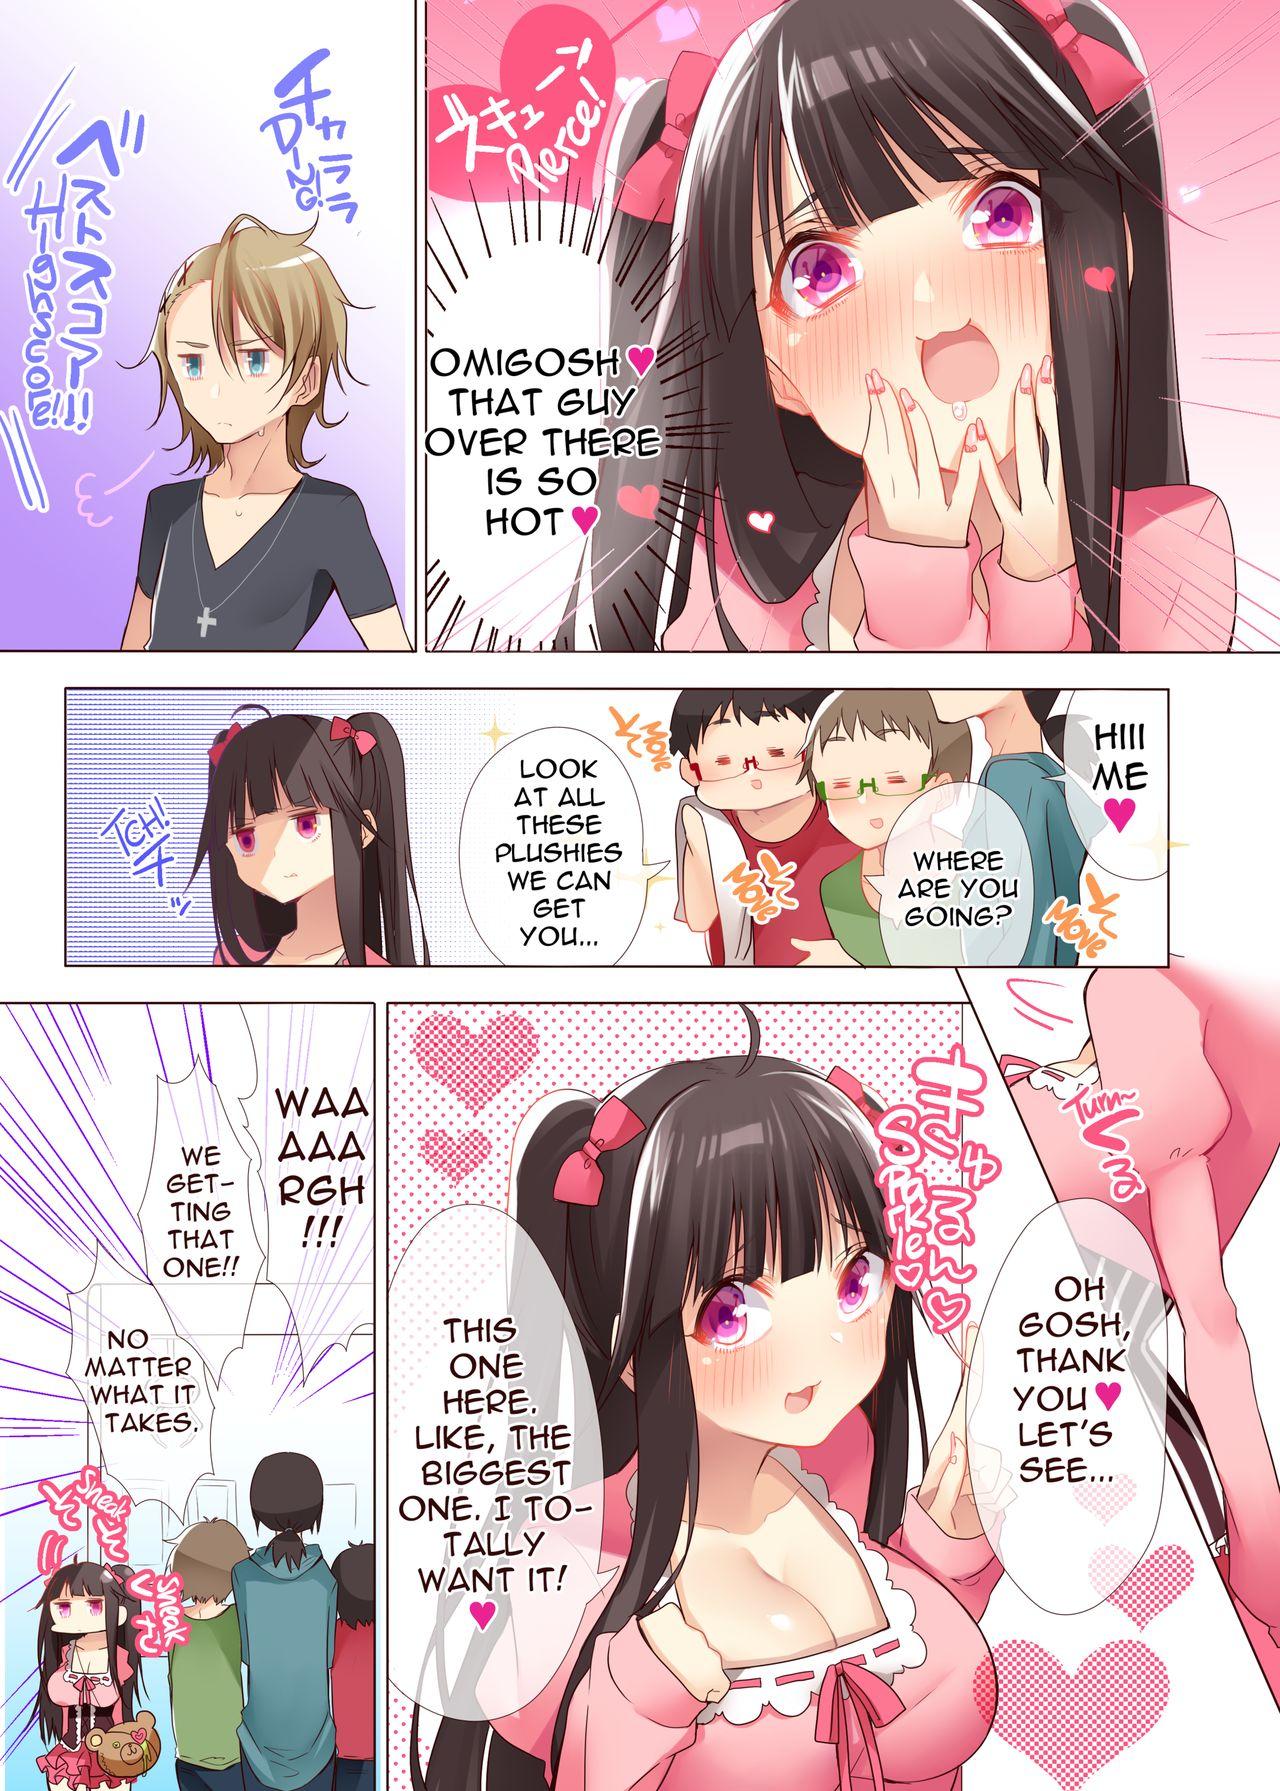 Best Blow Jobs Ever The Princess of an Otaku Group Got Knocked Up by Some Piece of Trash So She Let an Otaku Guy Do Her Too!? - Original Rubdown - Page 4